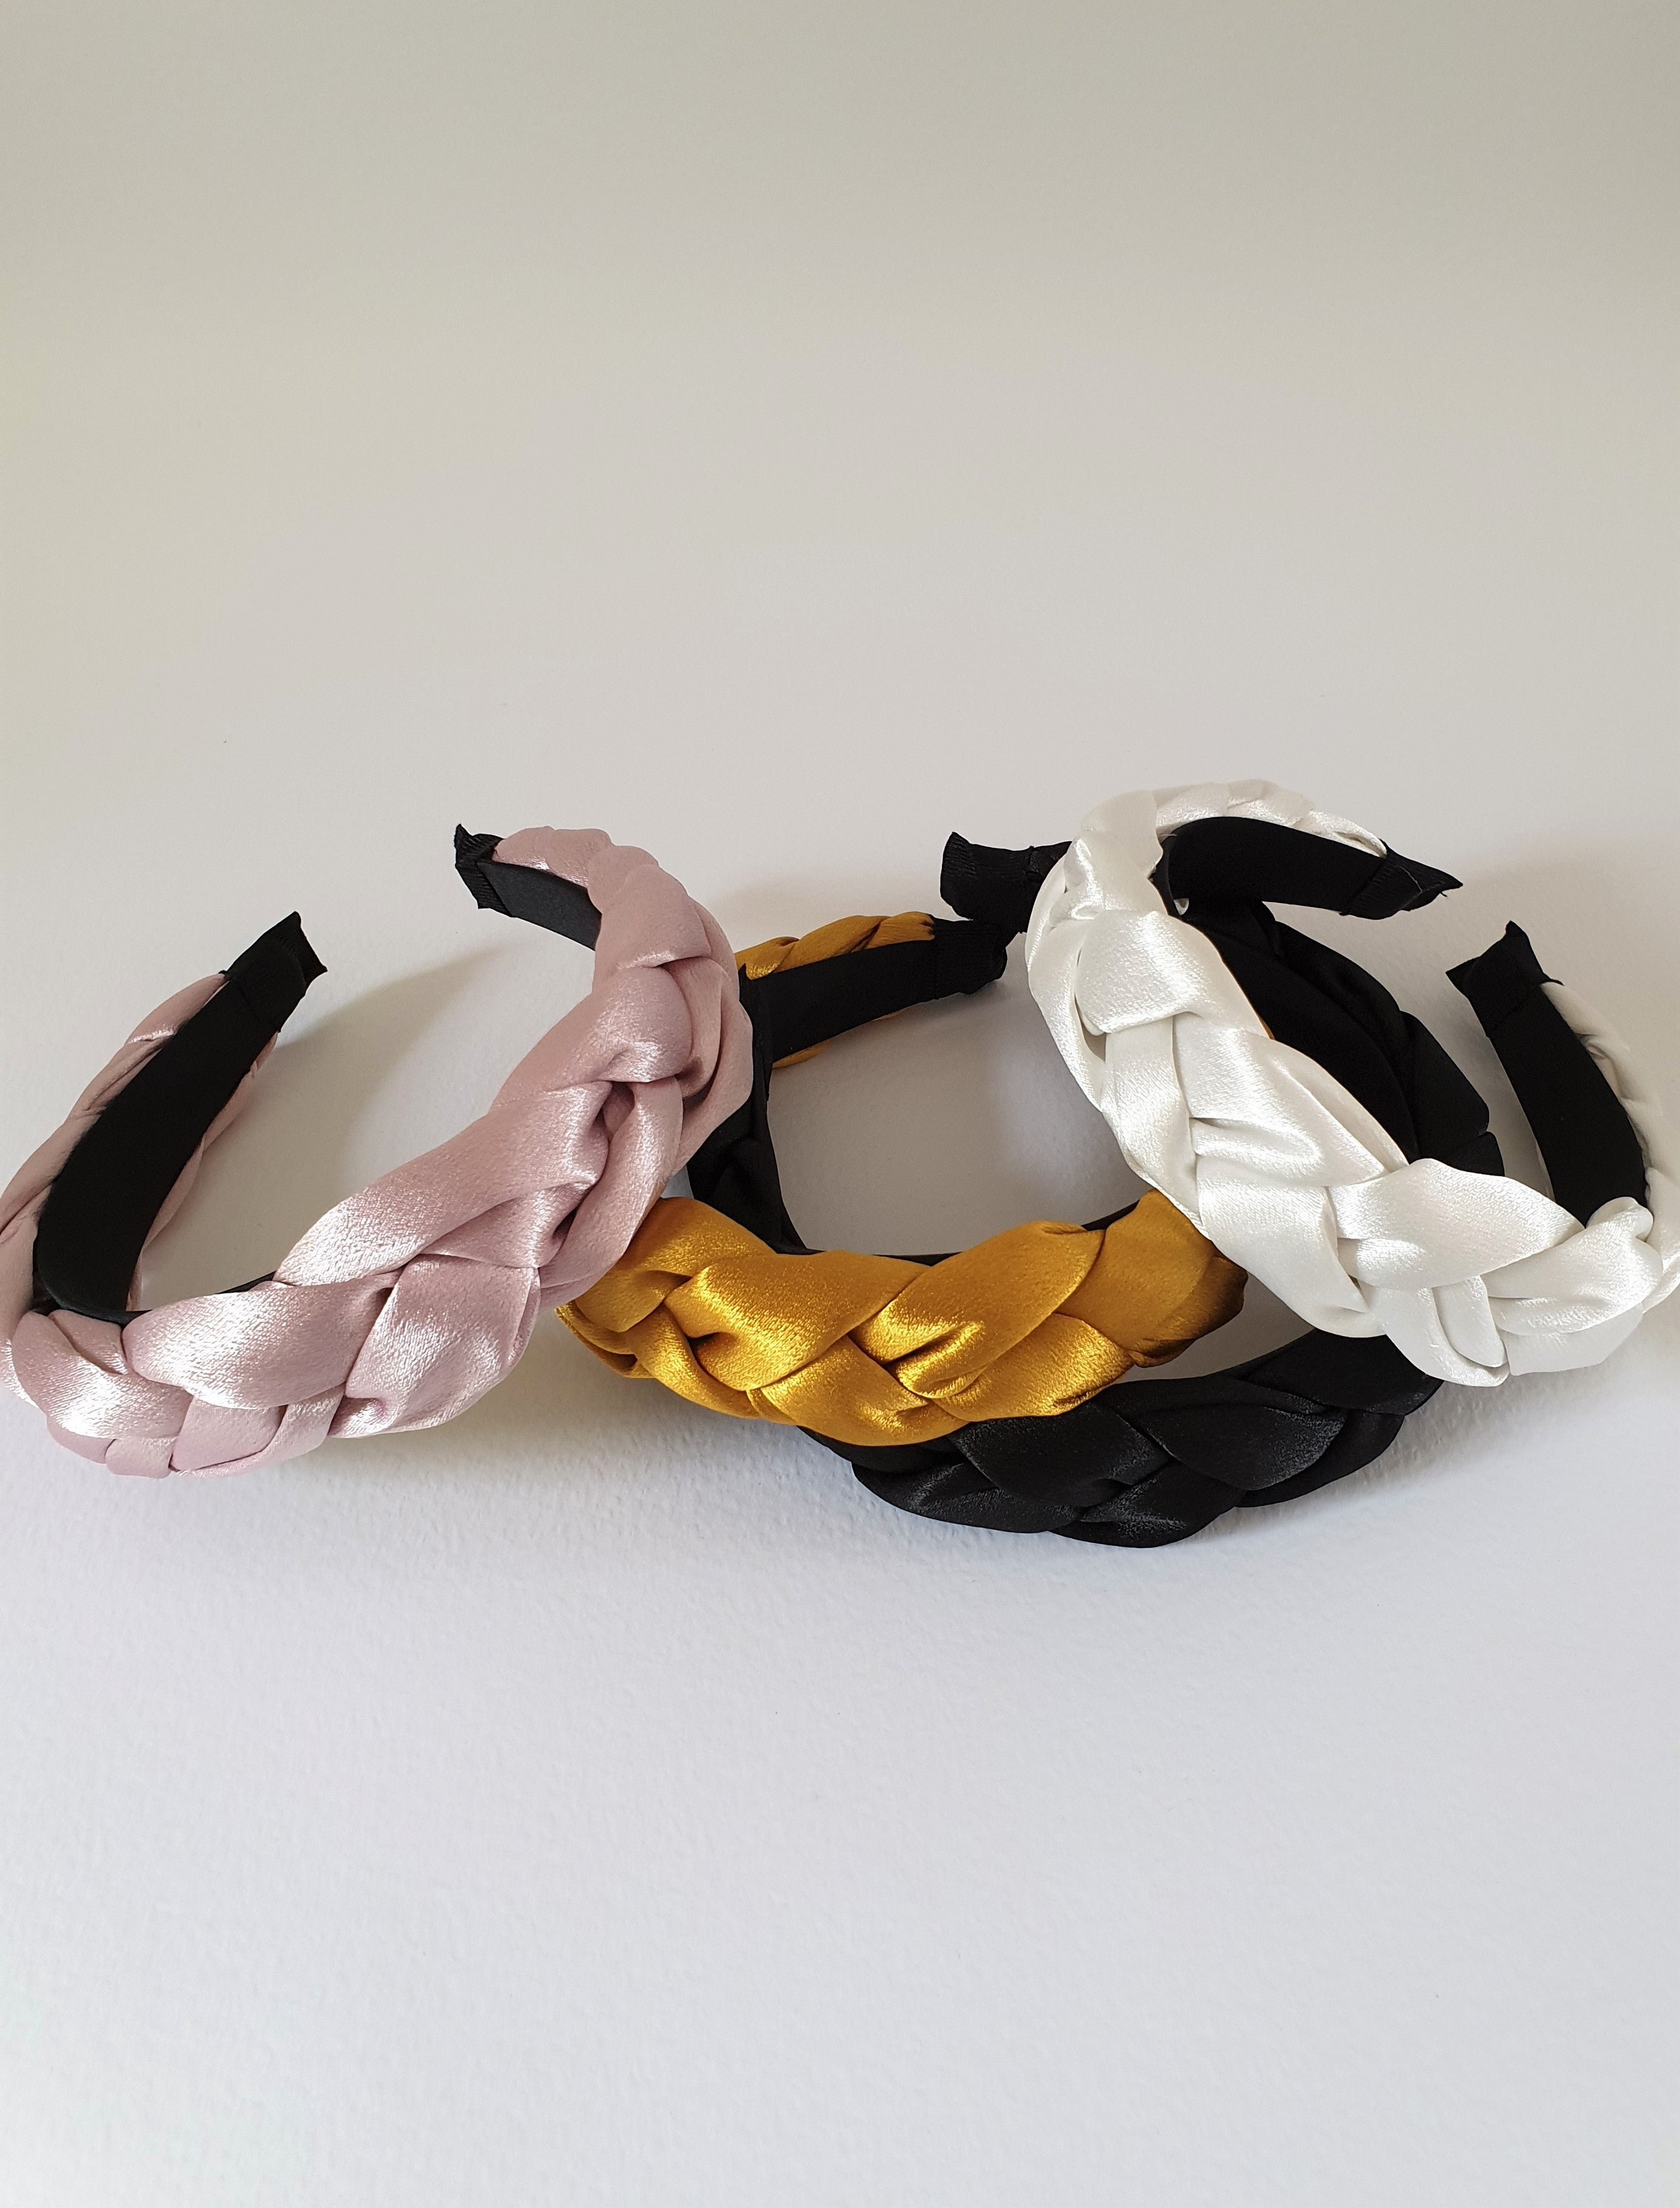 SATIN PADDED BAND - CANARY GOLD